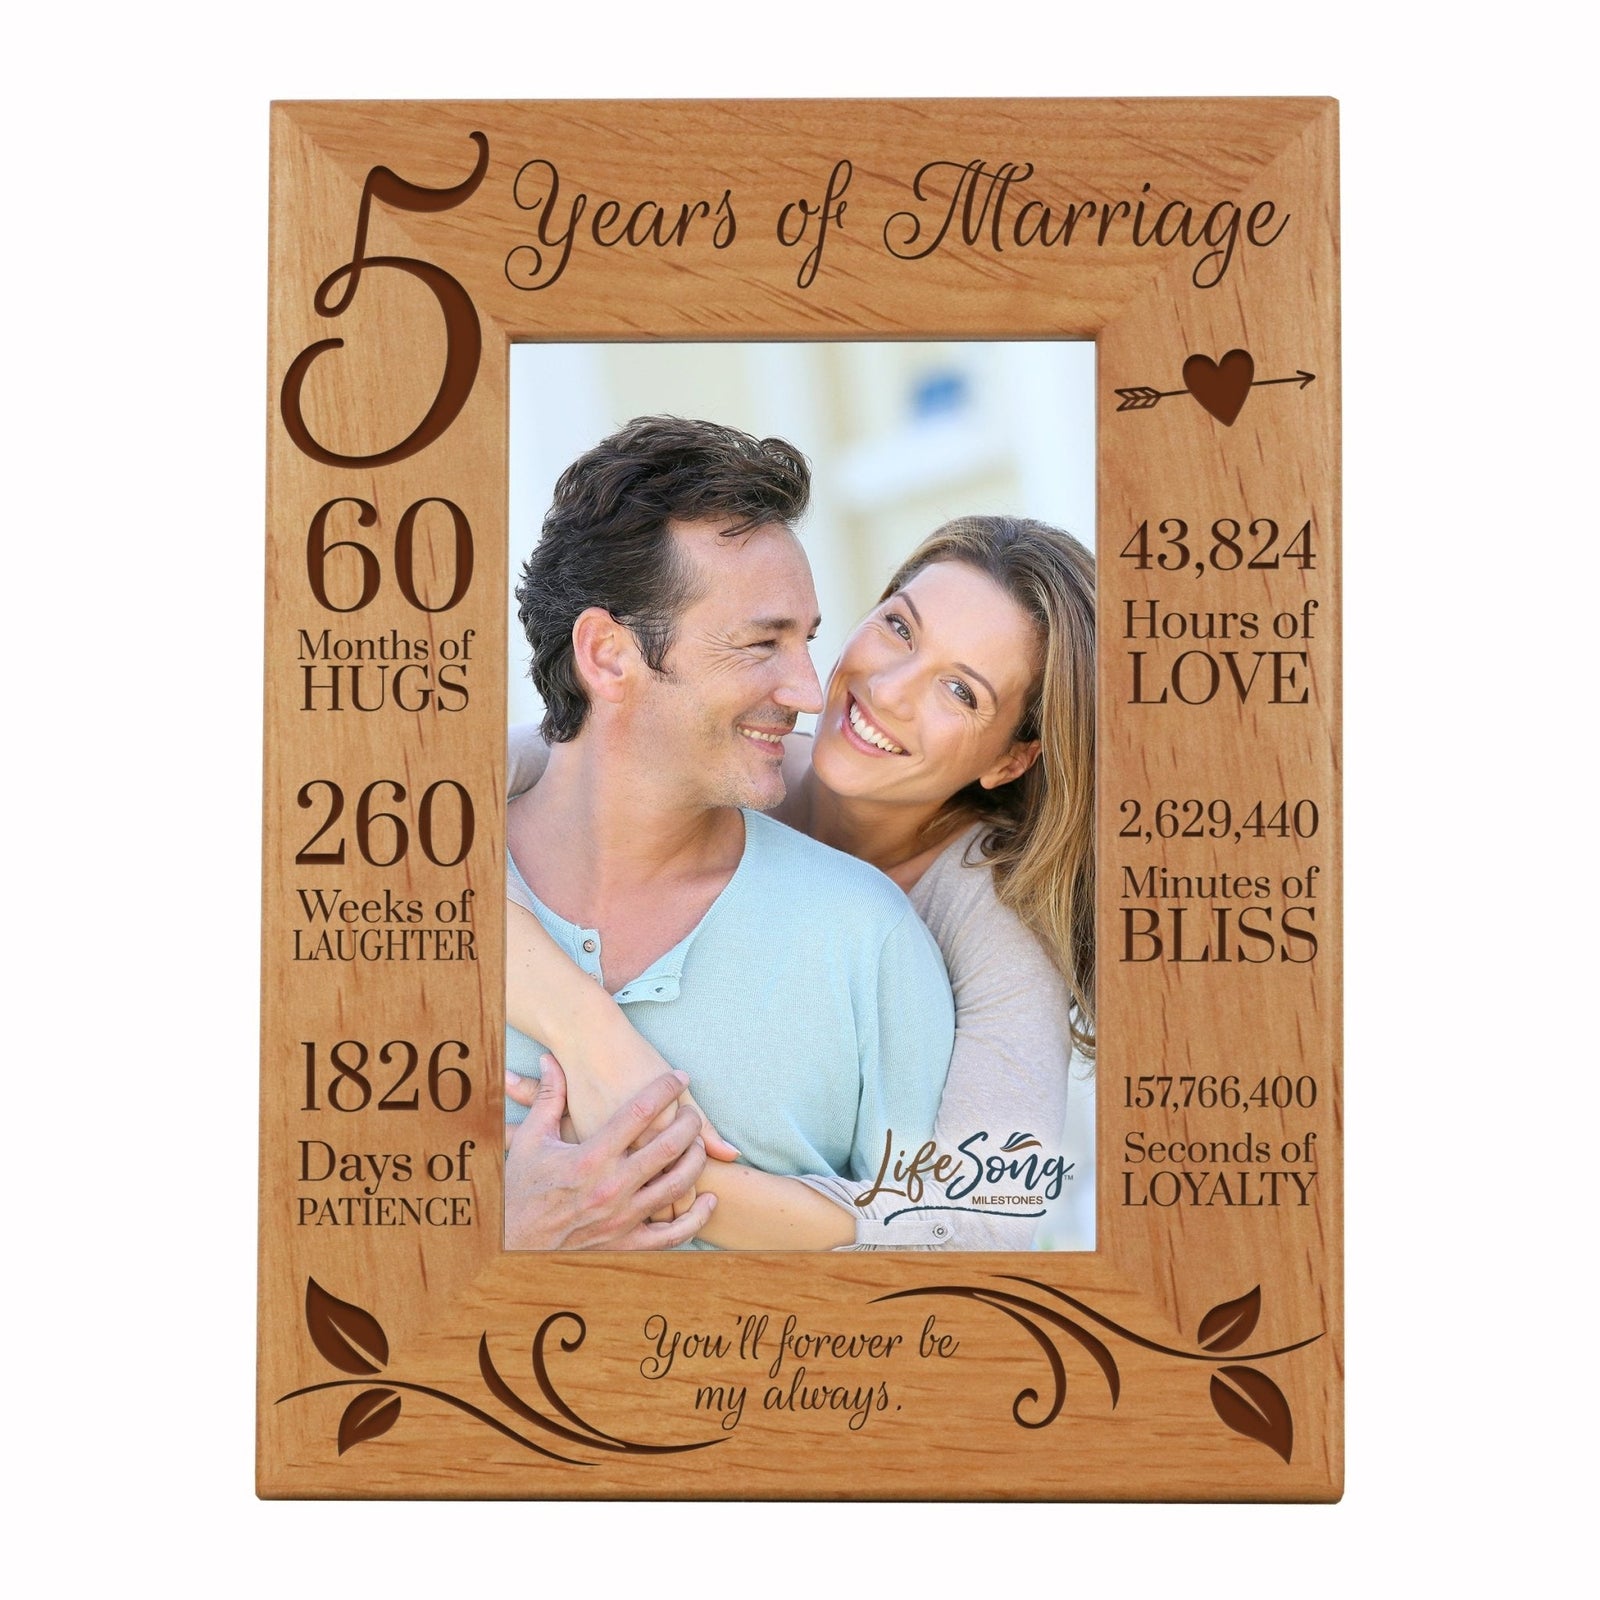 Engraved 5th Anniversary Picture Frame Gift for Couples - Forever Be My Always - LifeSong Milestones